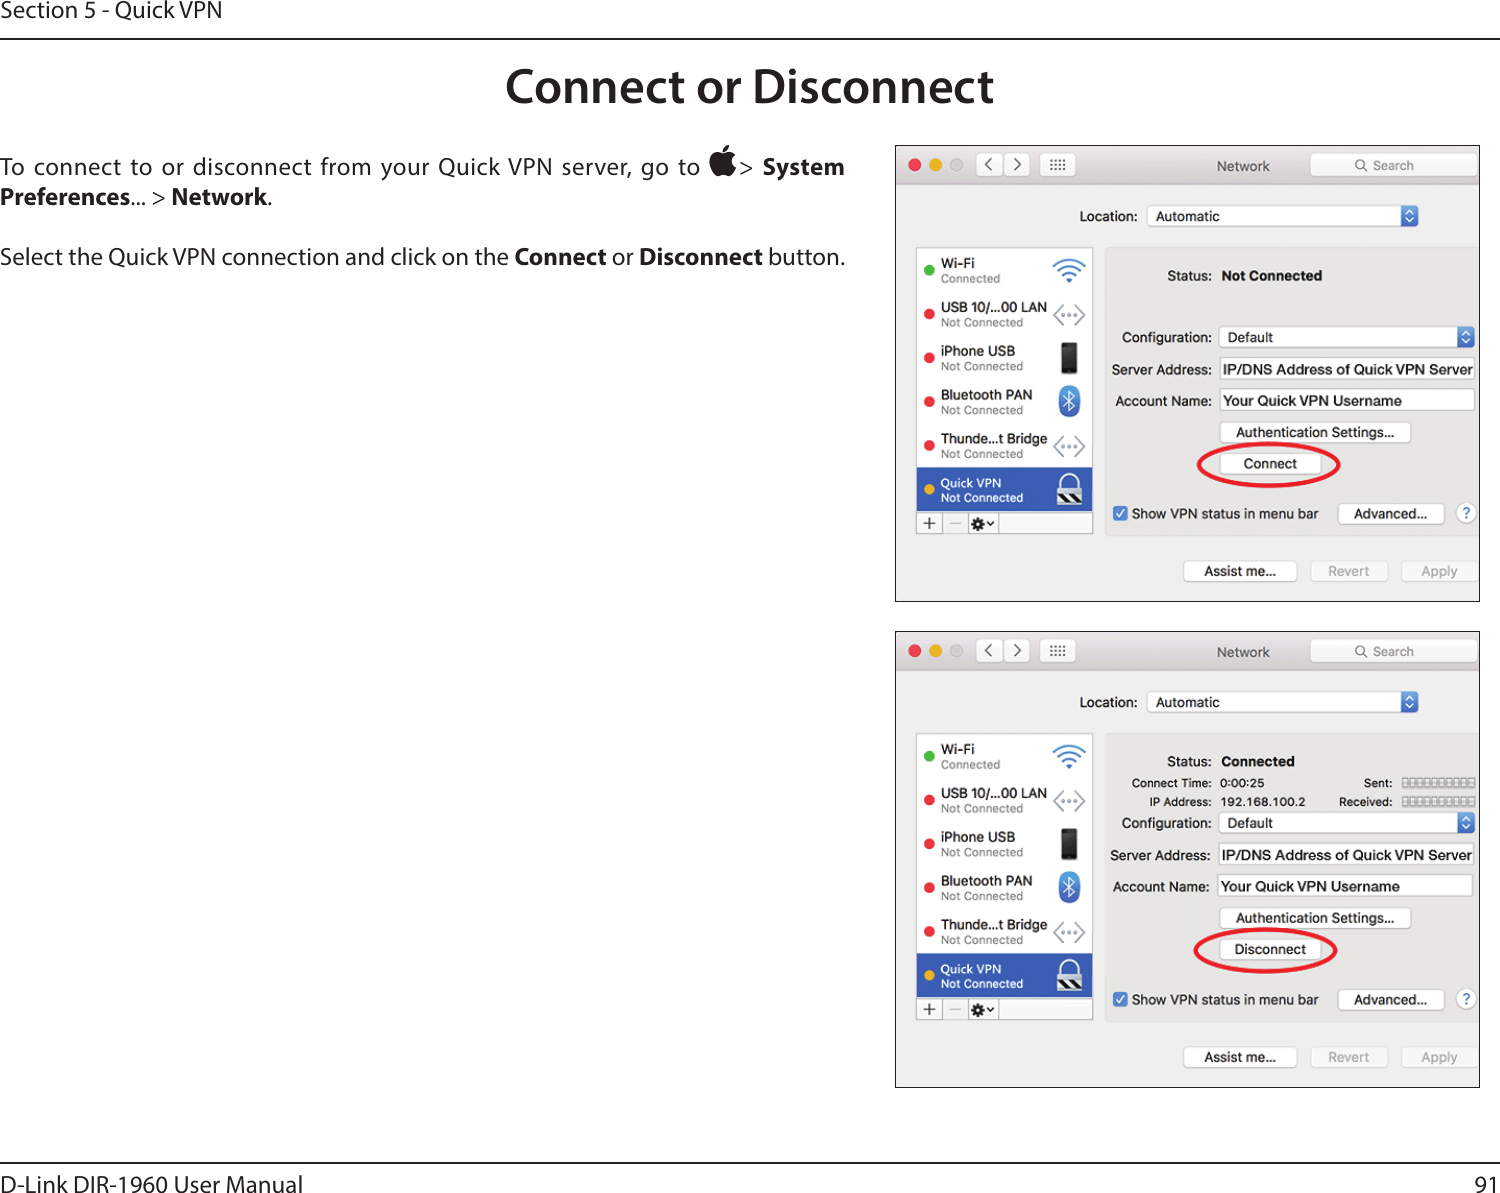 91D-Link DIR-1960 User ManualSection 5 - Quick VPNConnect or DisconnectTo connect to or disconnect from your Quick VPN server, go to &gt;  System Preferences... &gt; Network.Select the Quick VPN connection and click on the Connect or Disconnect button.